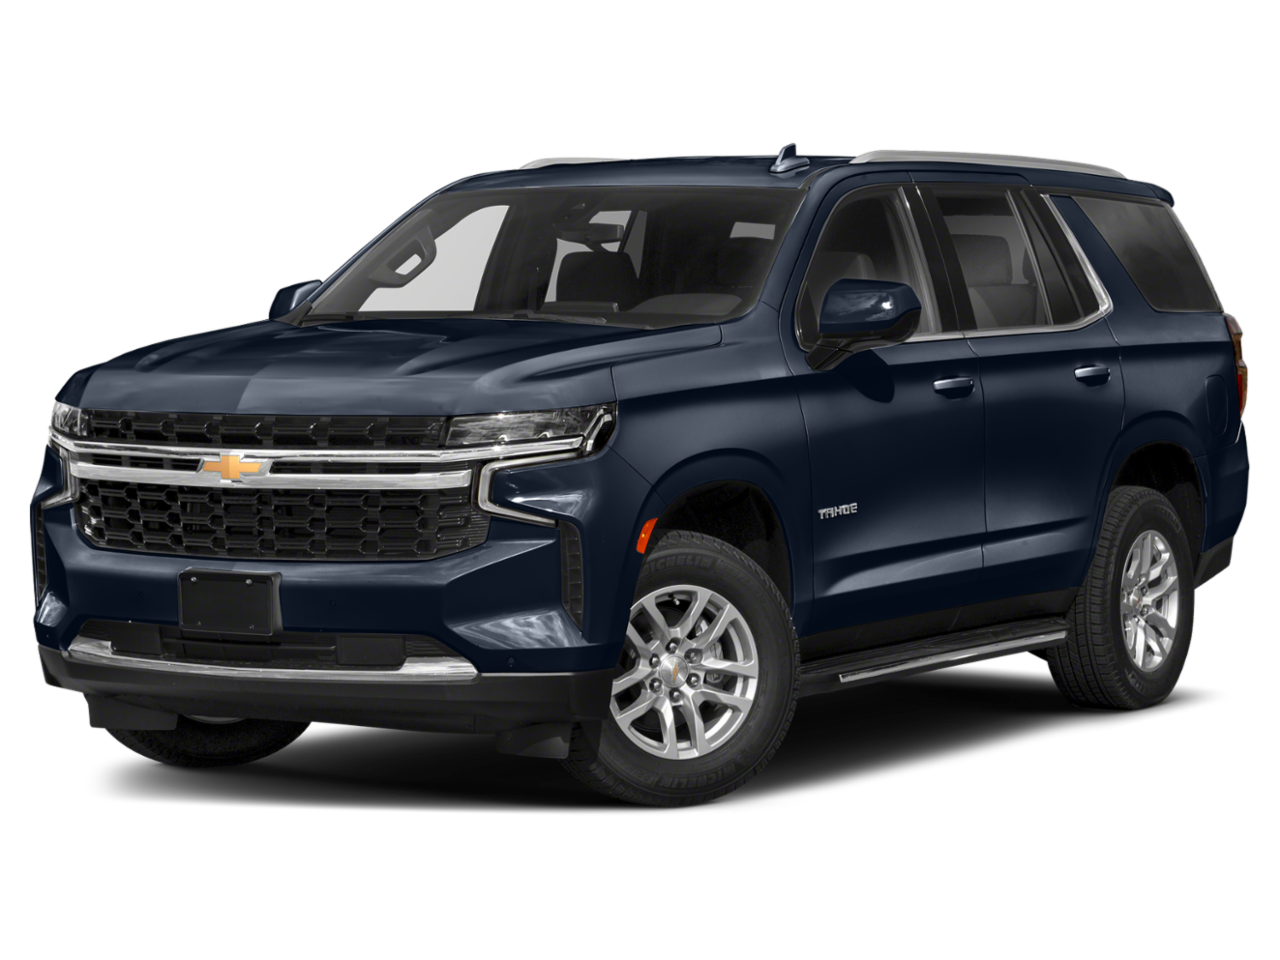 New Chevrolet Tahoe from your Dearborn, MI dealership, Les Stanford